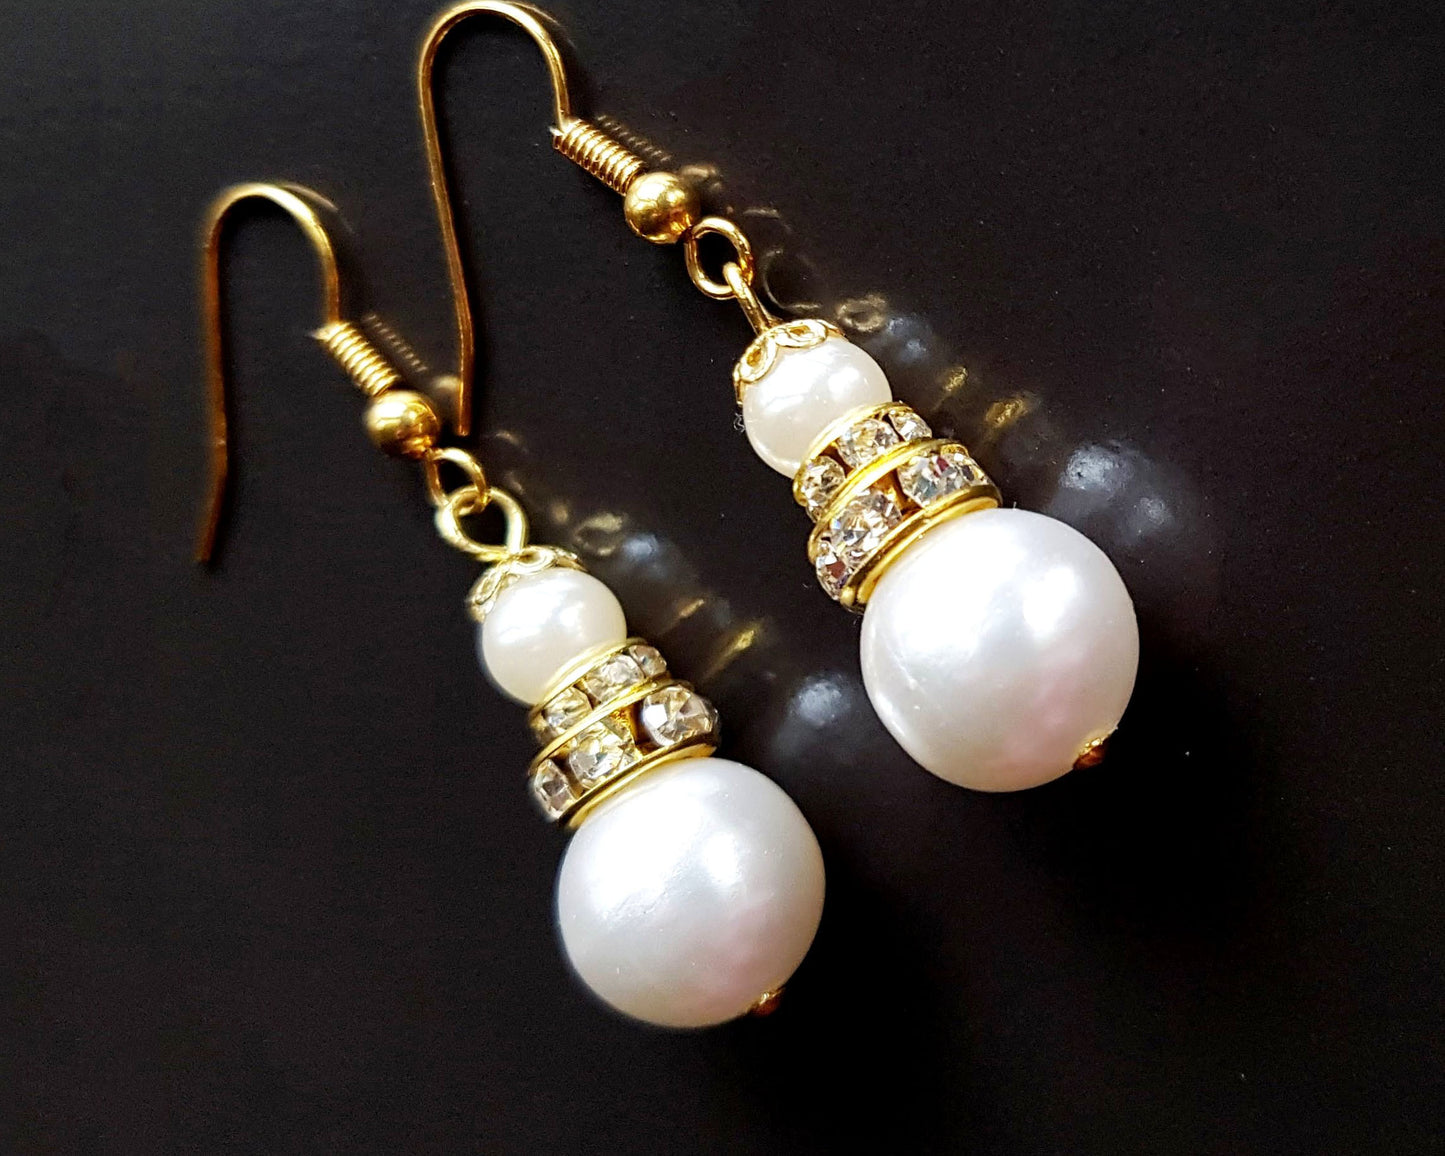 Victorian Style Large Pearl and Crystal Earrings, long dangles earring with large white peals and decorative gold details and crystal. Earrings dangle on french style earring hooks 